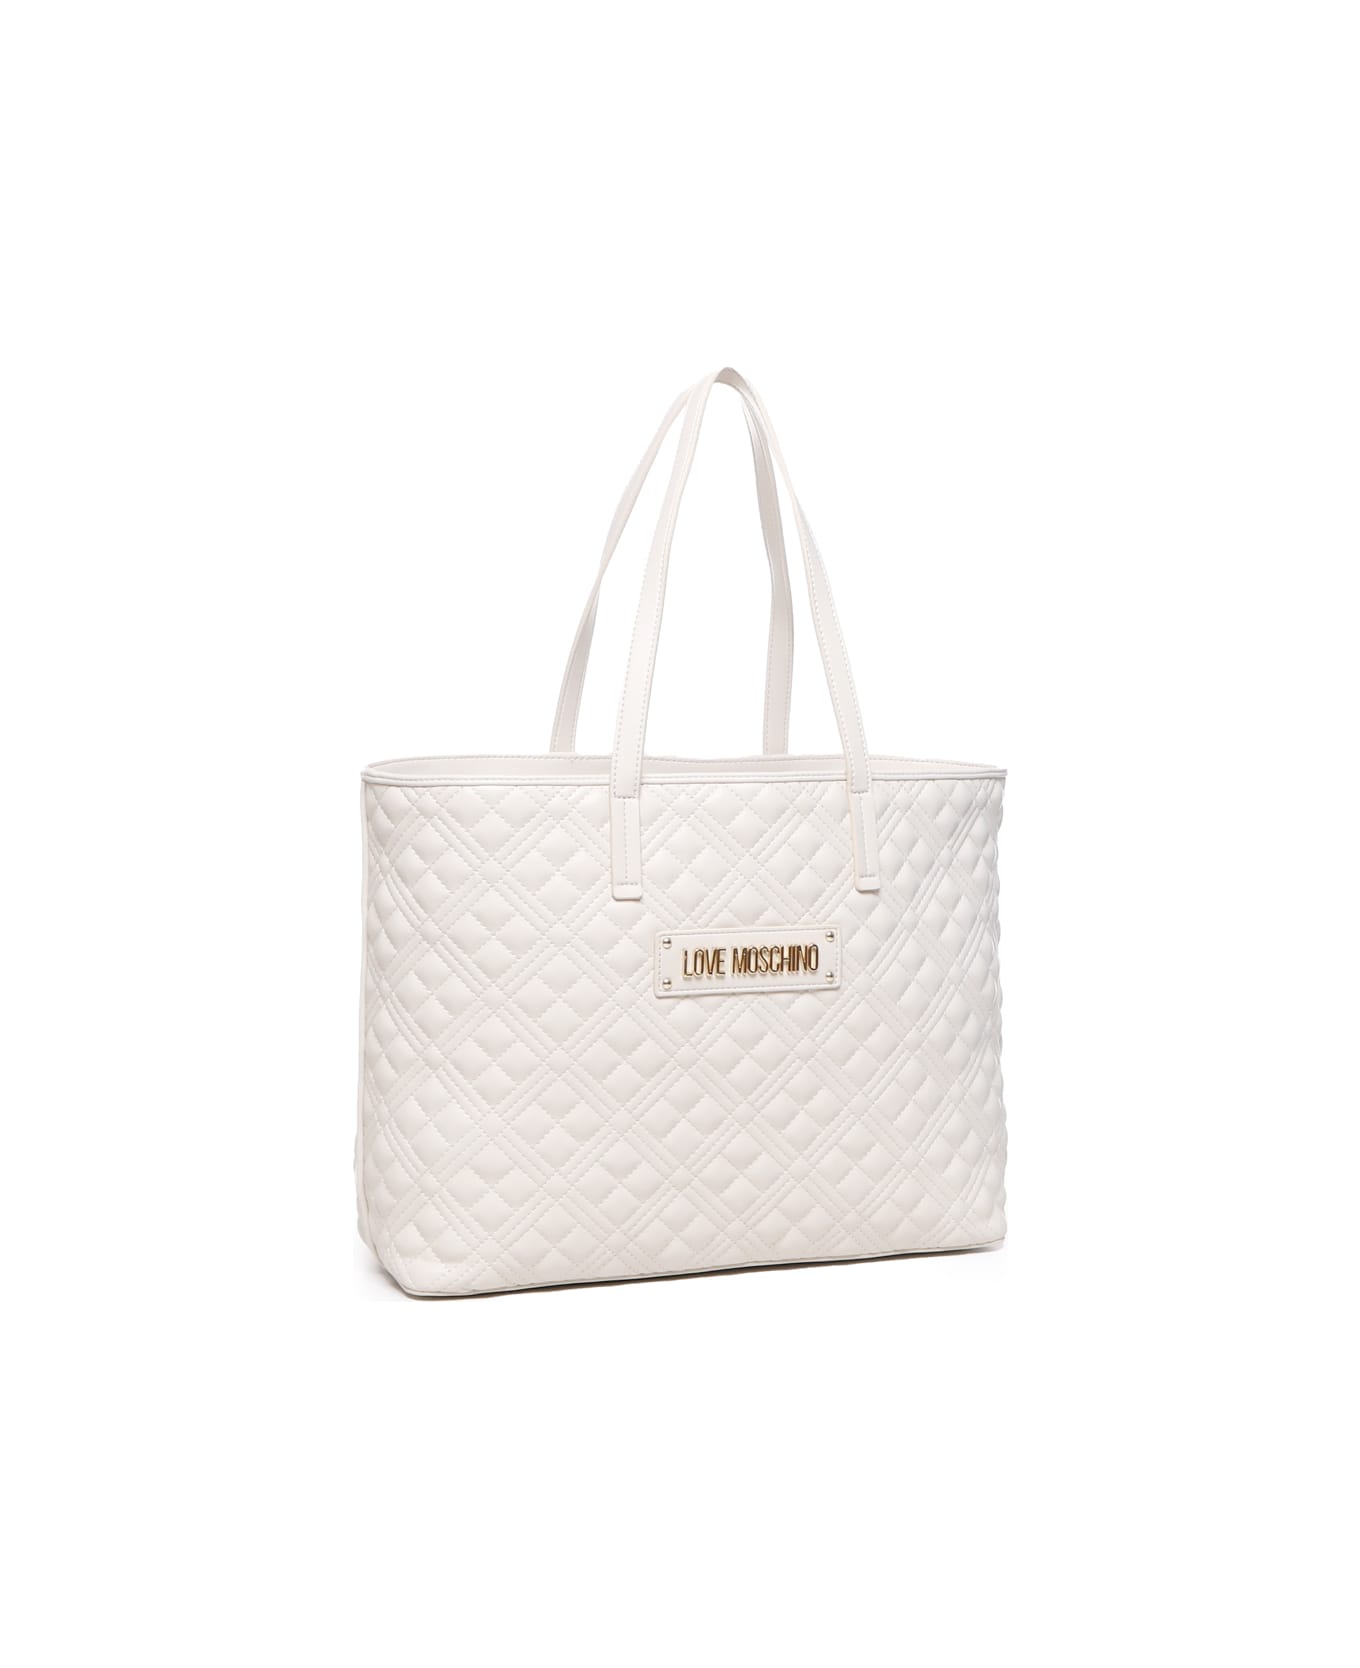 Love Moschino Quilted Shopping Bag - Ivory